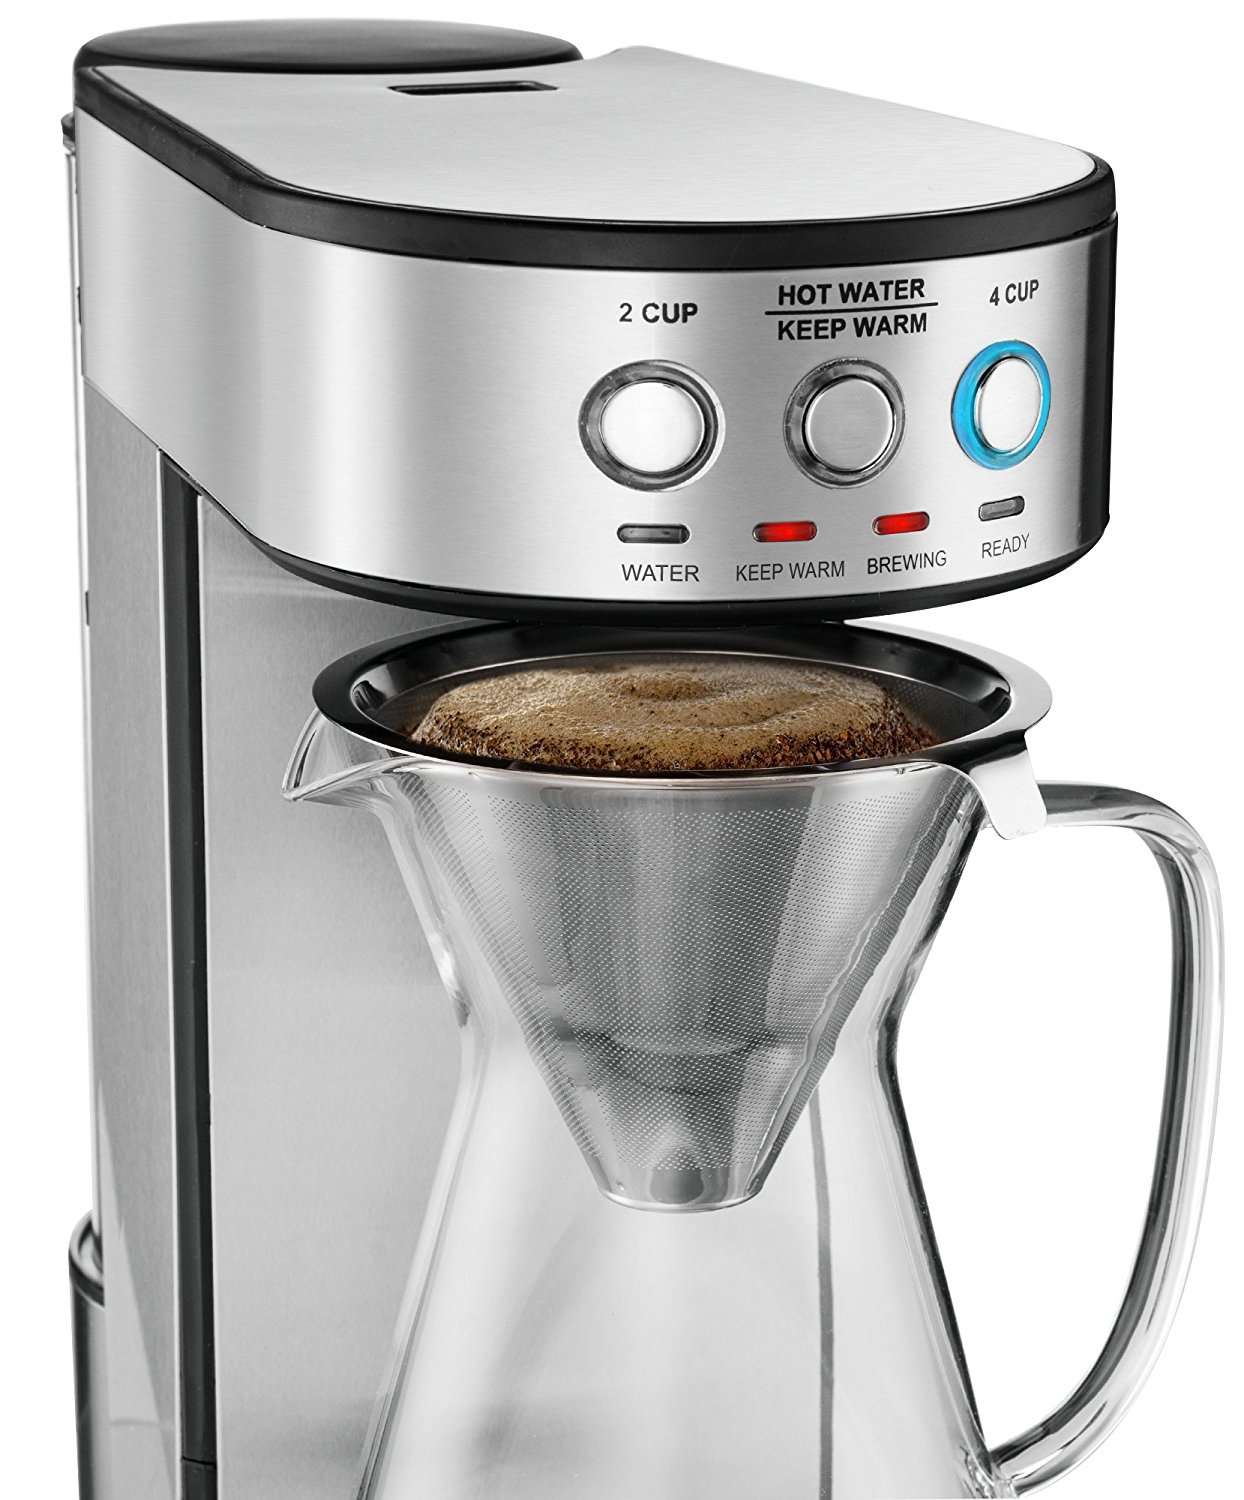 Gourmia GCM4900 Automatic Pour Over Coffee Maker Best Price Review